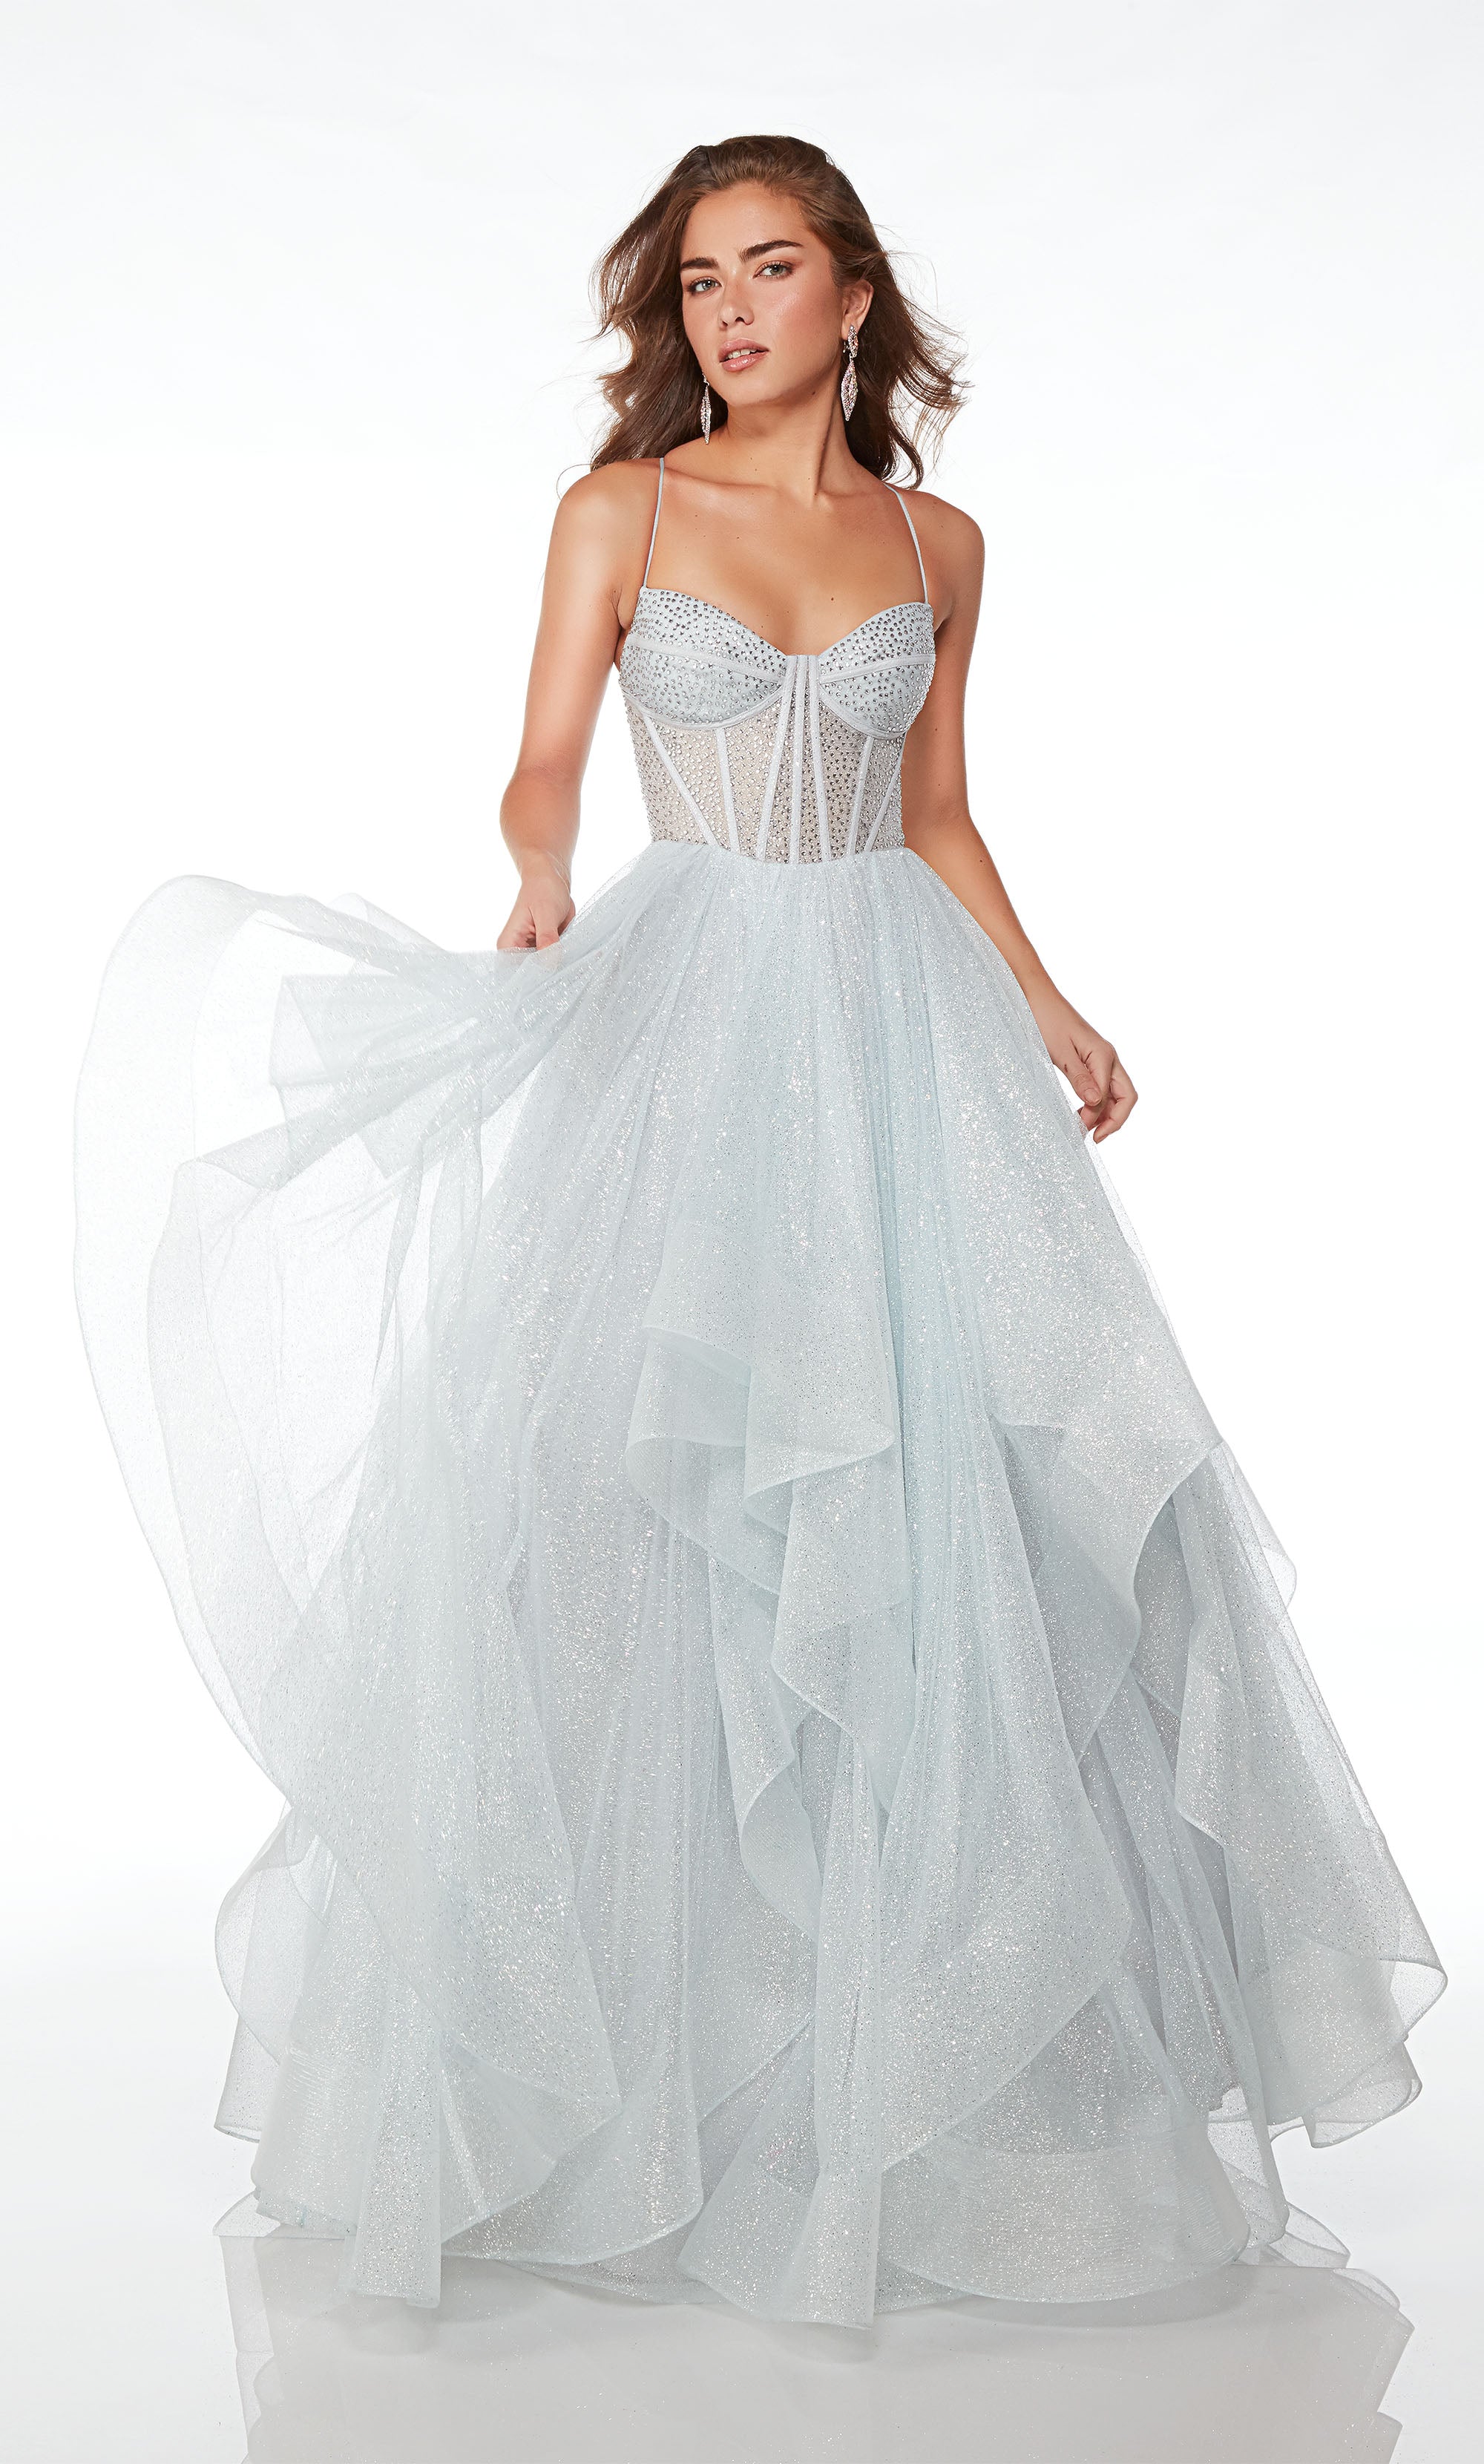 a classic wedding ballgown with a strapless embellished bodice and